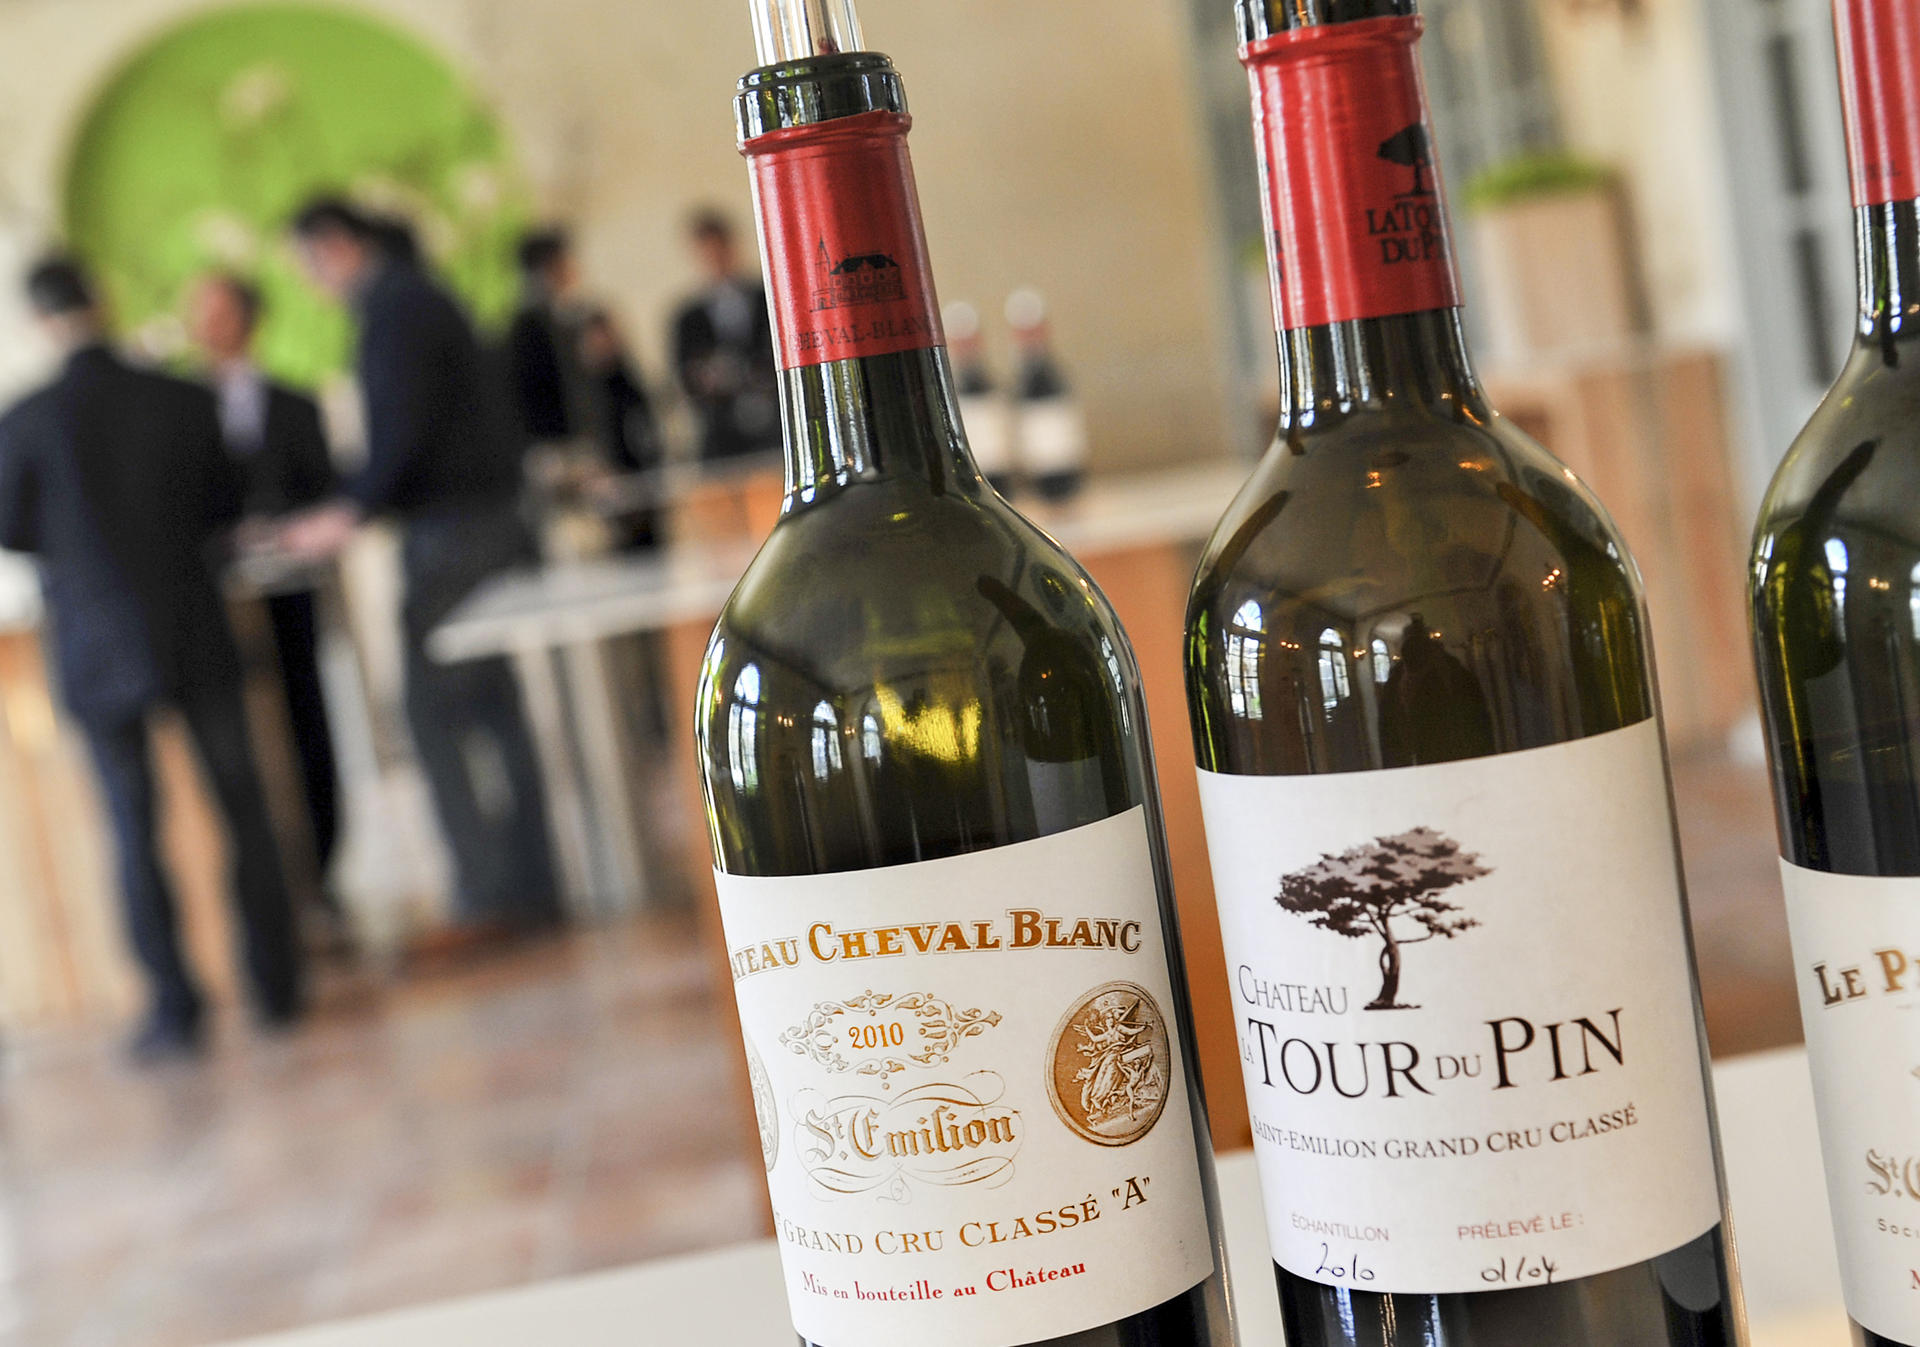 2010 Saint-Emilion has a complexity and nobility of texture and finish that perhaps surpasses 2009. Photo: AFP